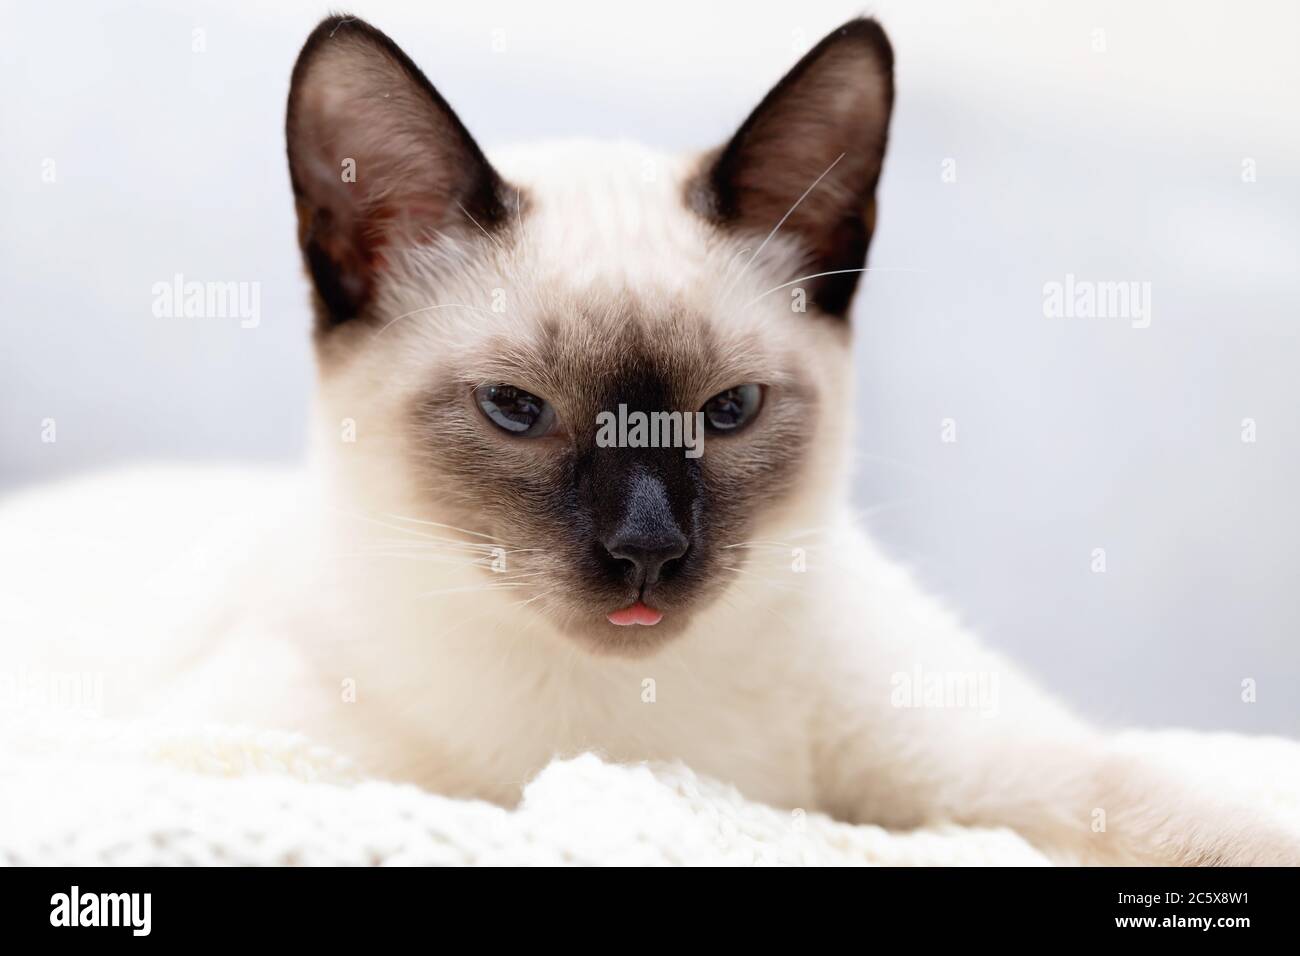 The cat is lying on the couch and funny stuck out the tip of his tongue. Stock Photo